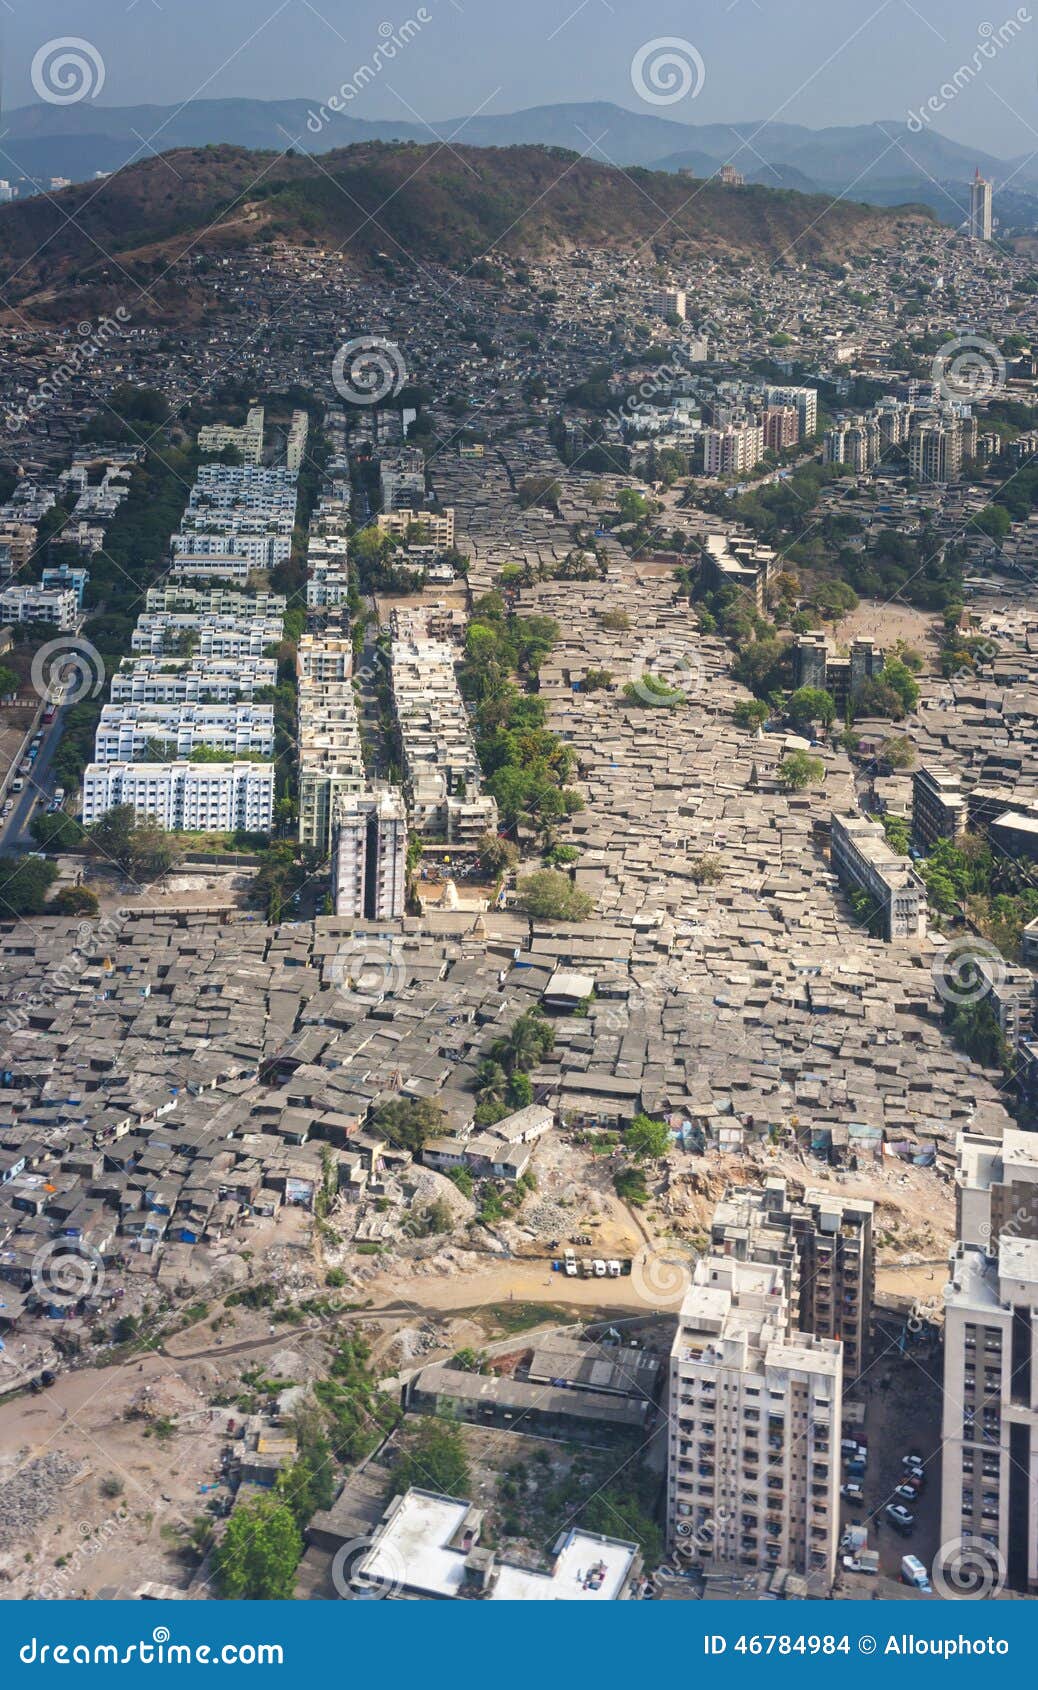 aerial-view-mumbai-slums-seen-air-fill-every-gap-larger-residential-buildings-offices-46784984.jpg